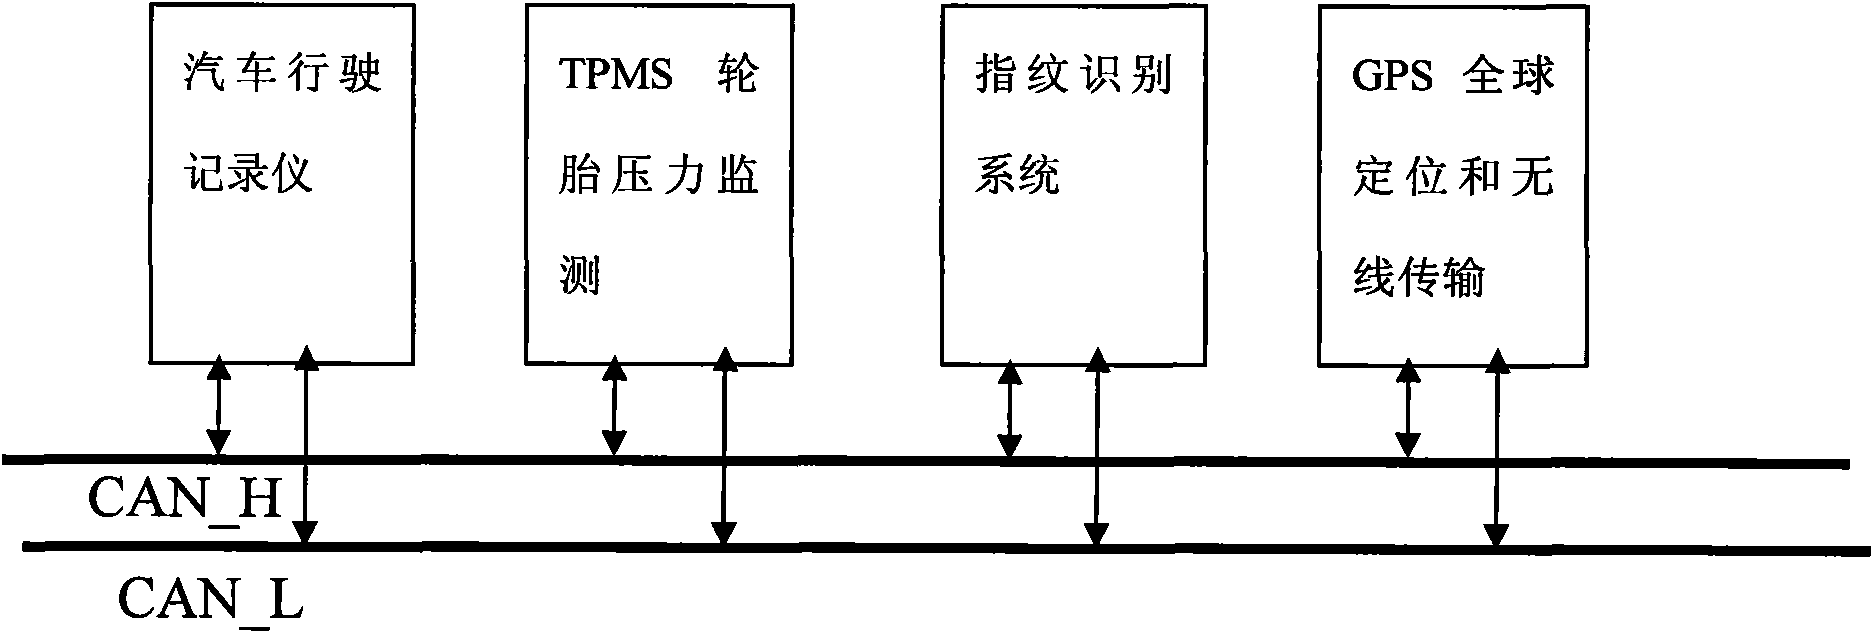 Safety monitoring system for transport vehicle